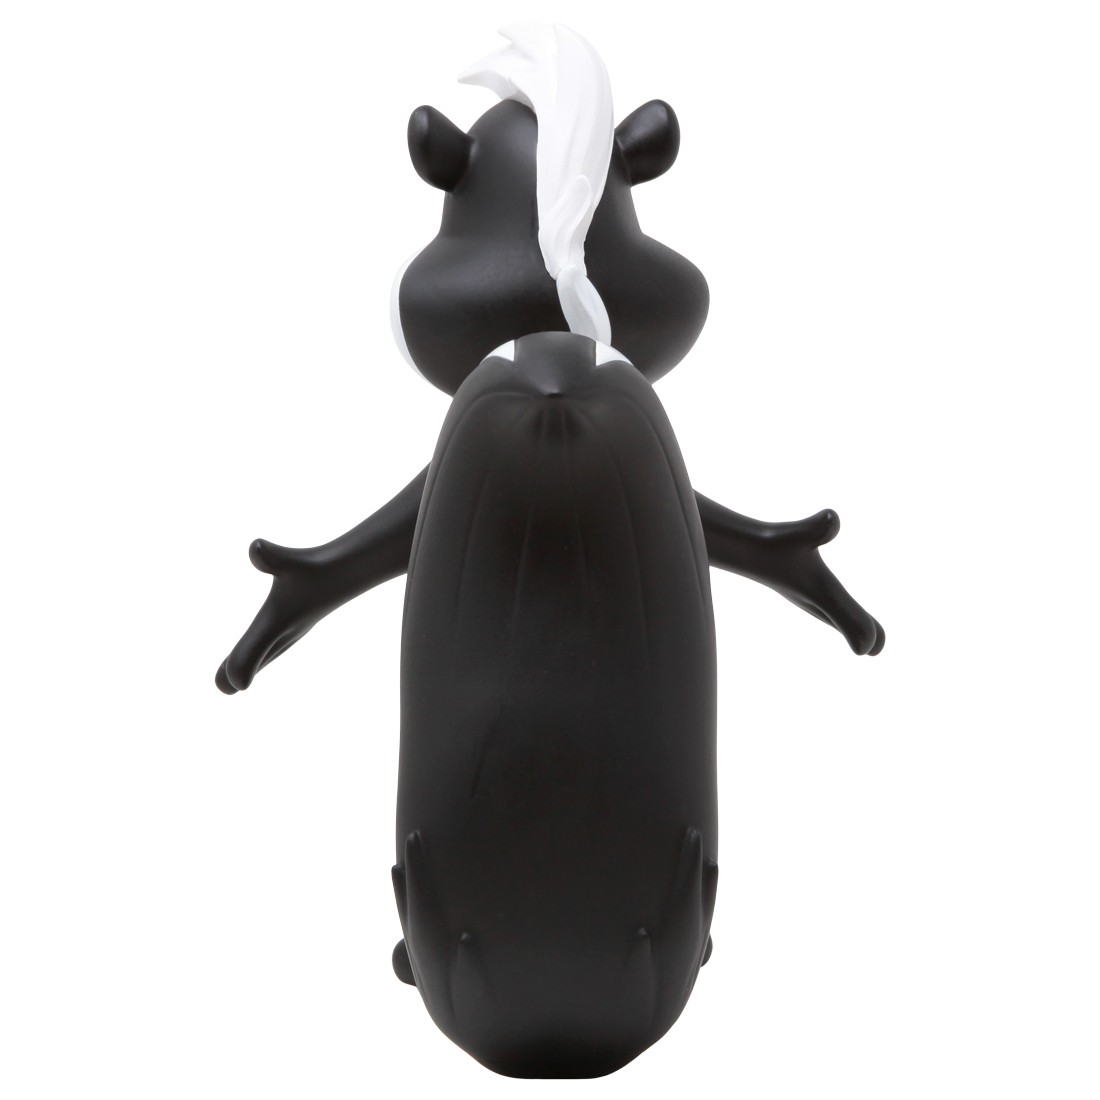 Details about   Ron English x Looney Tunes Pepe Le Pew Figure 